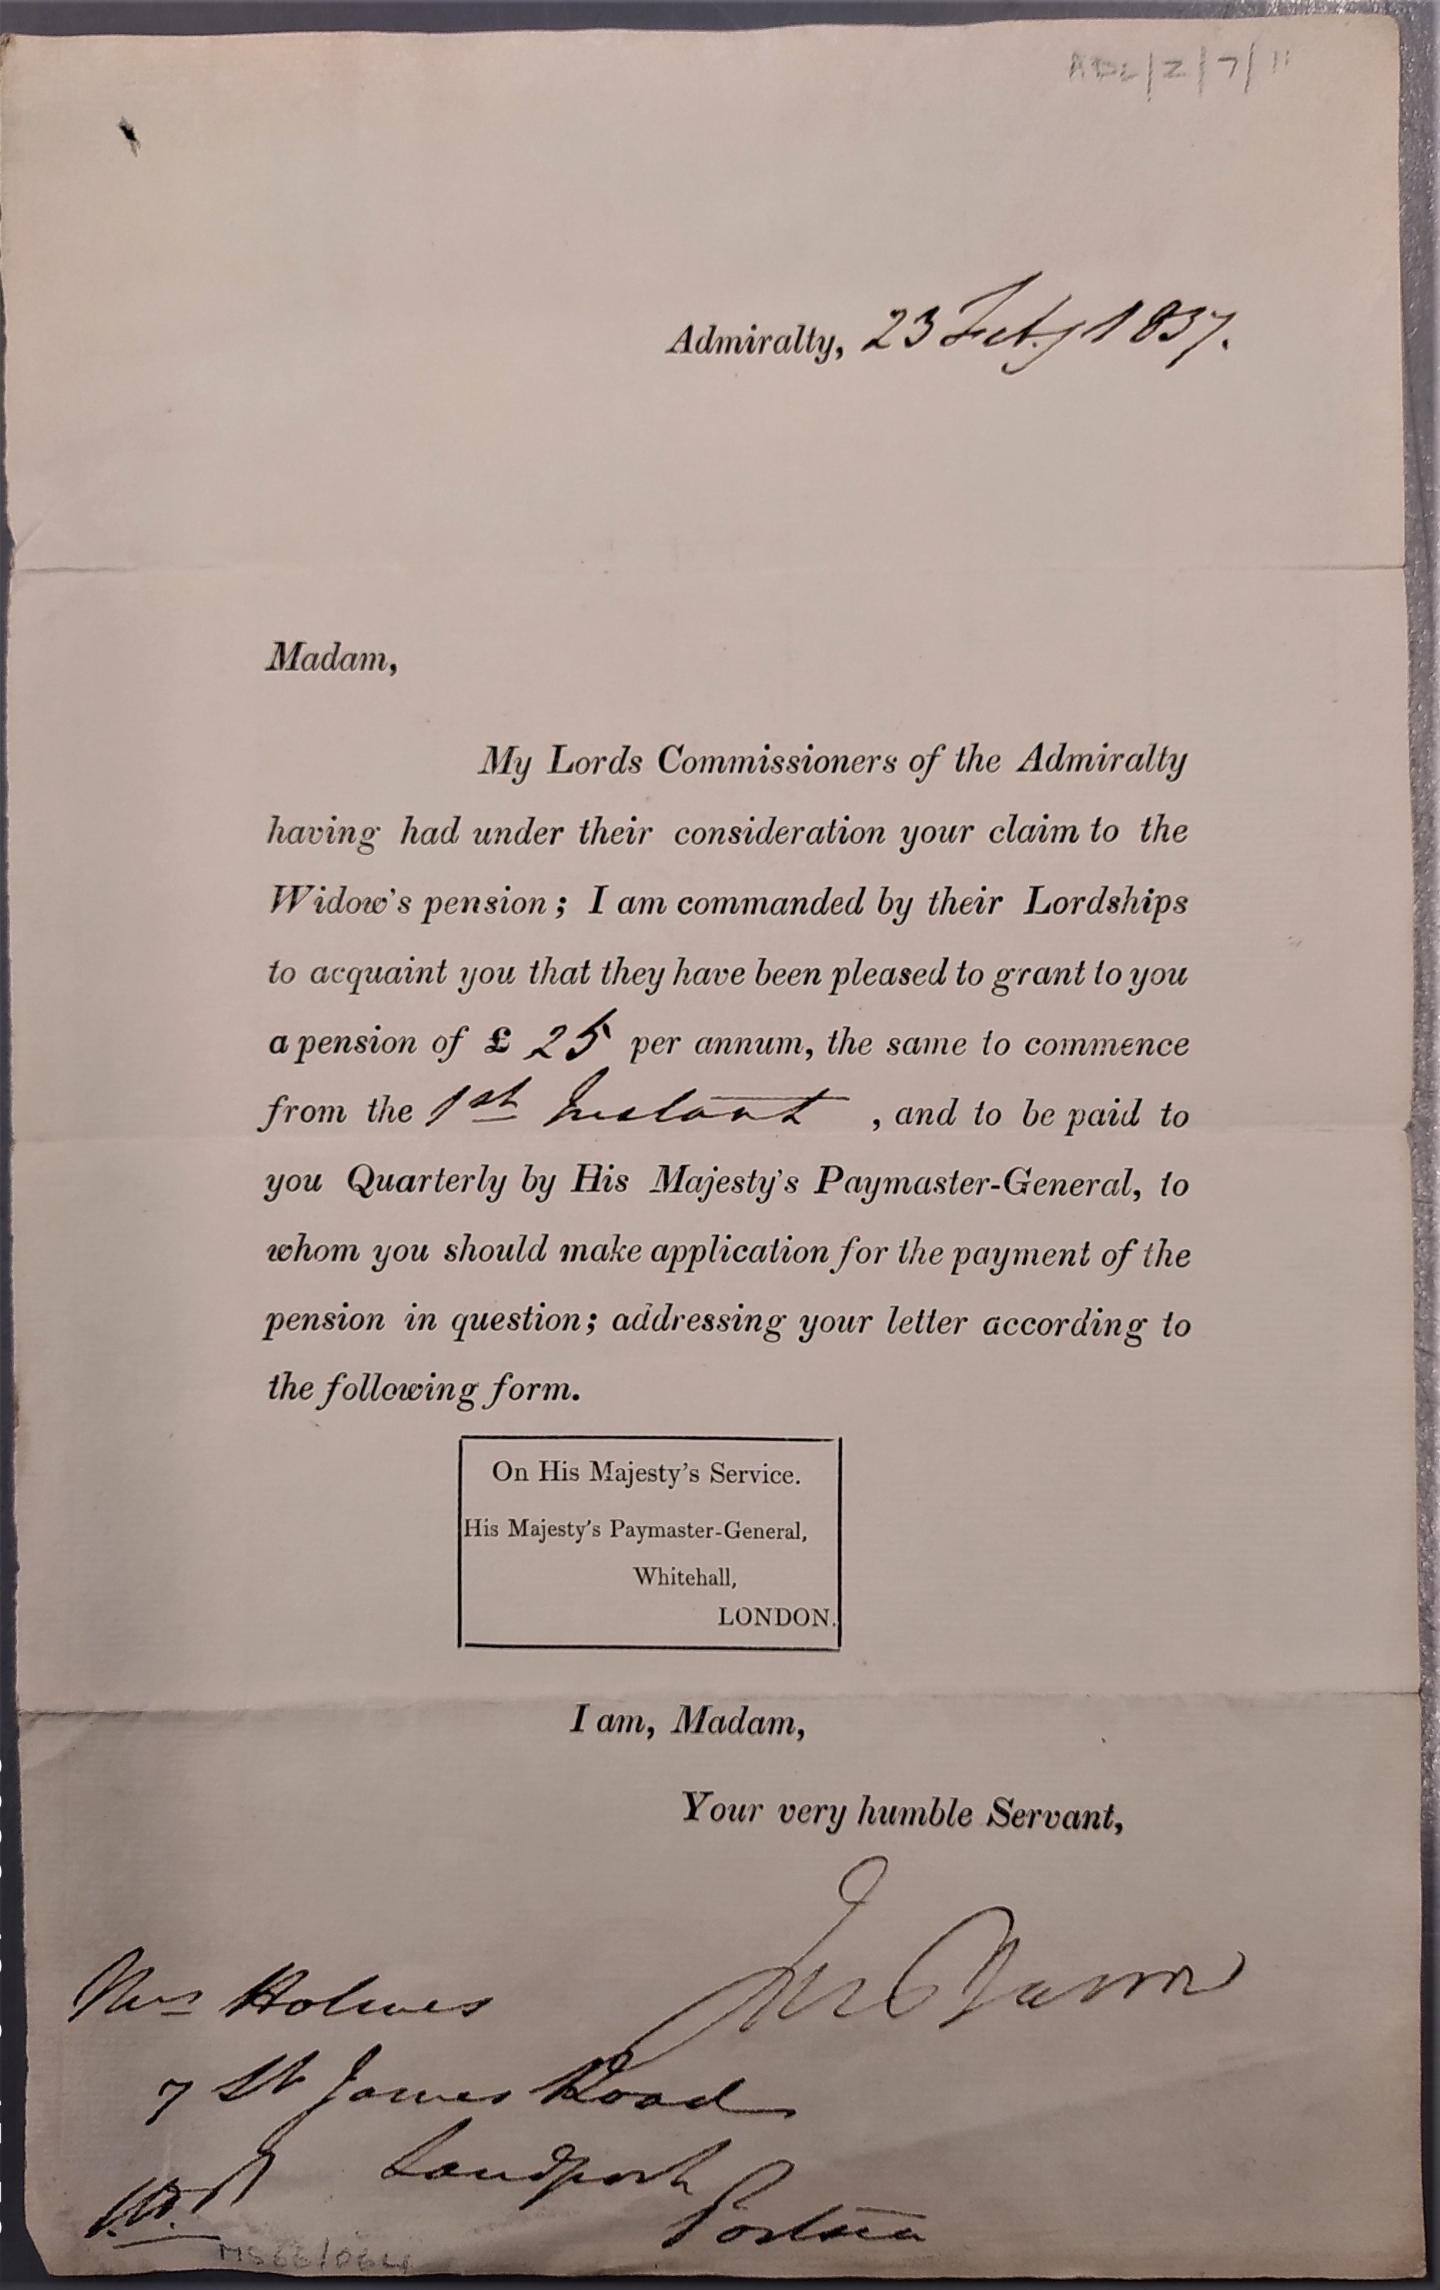 Letter from the Admiralty to Samuel Holmes' widow